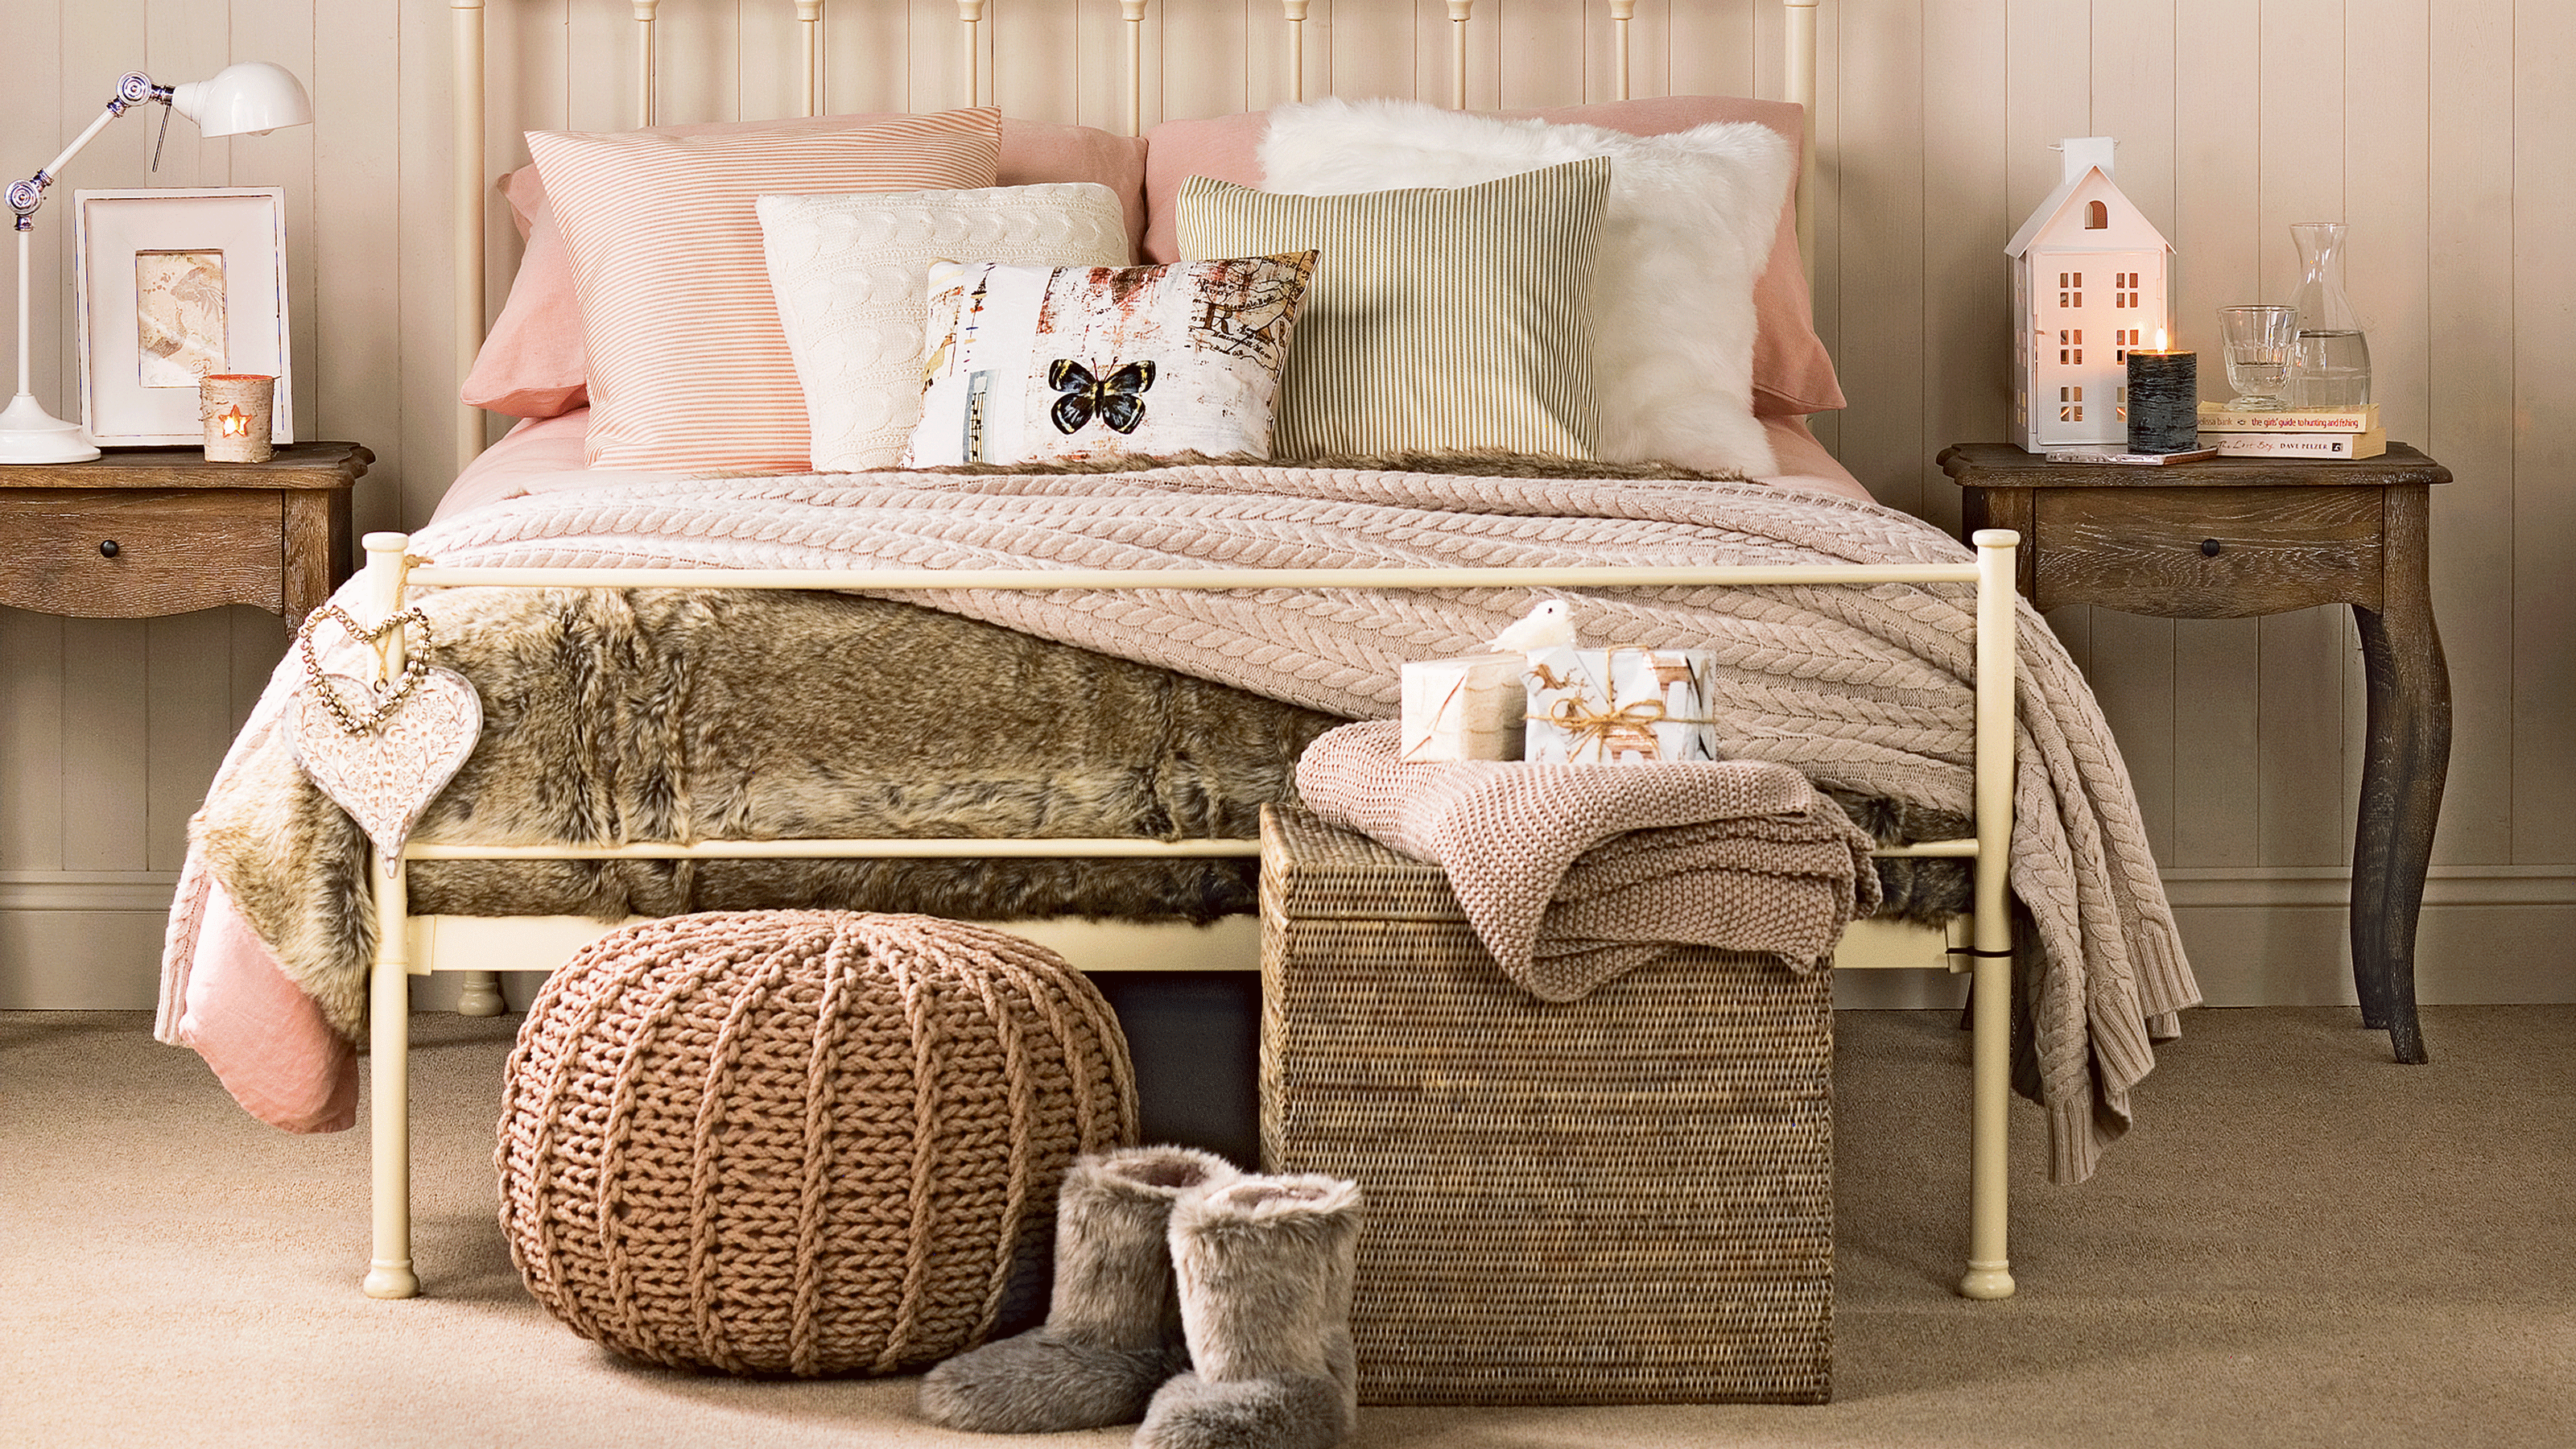 Neutral bedroom with jute pouffe and slippers